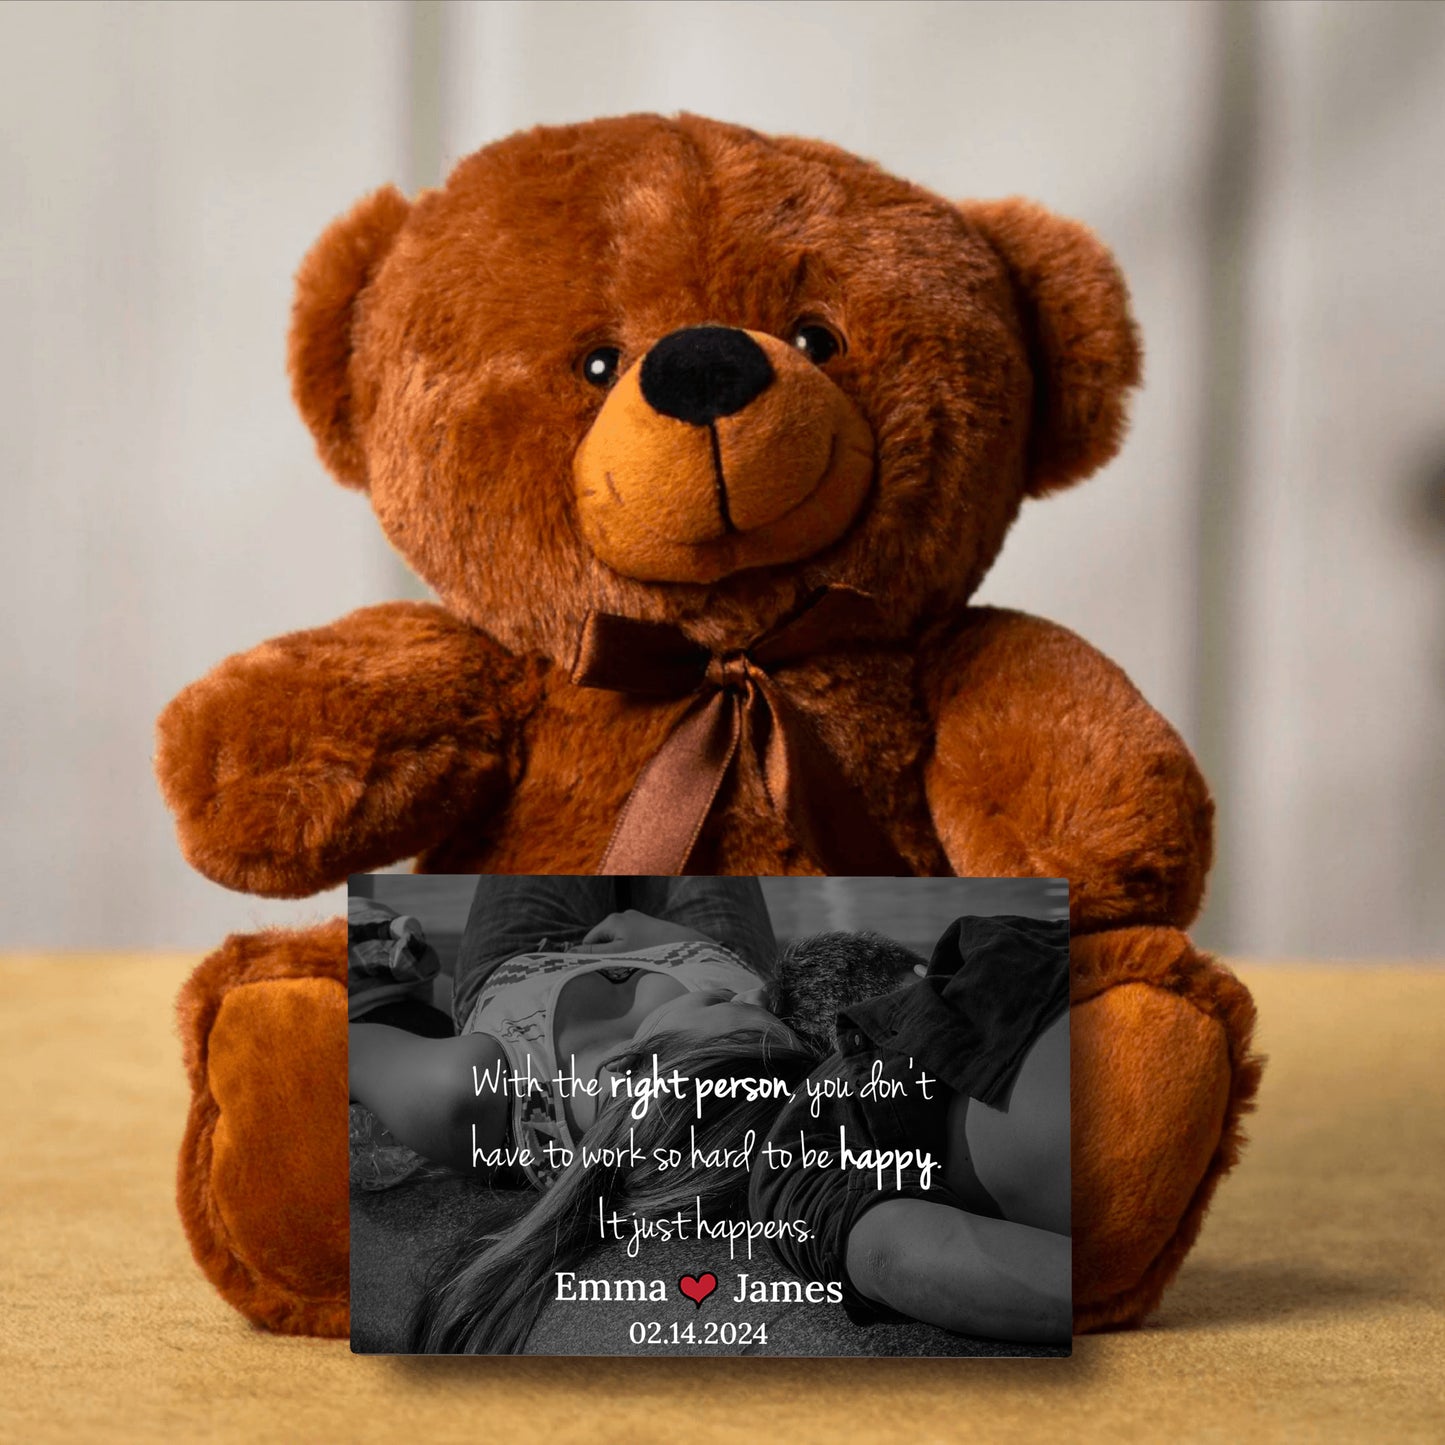 Brown Teddy Bear, Custom Message On Canvas, Your Own Personal Photo, Wedding Anniversary Gifts, Gifts for Couples, Valentines Gift